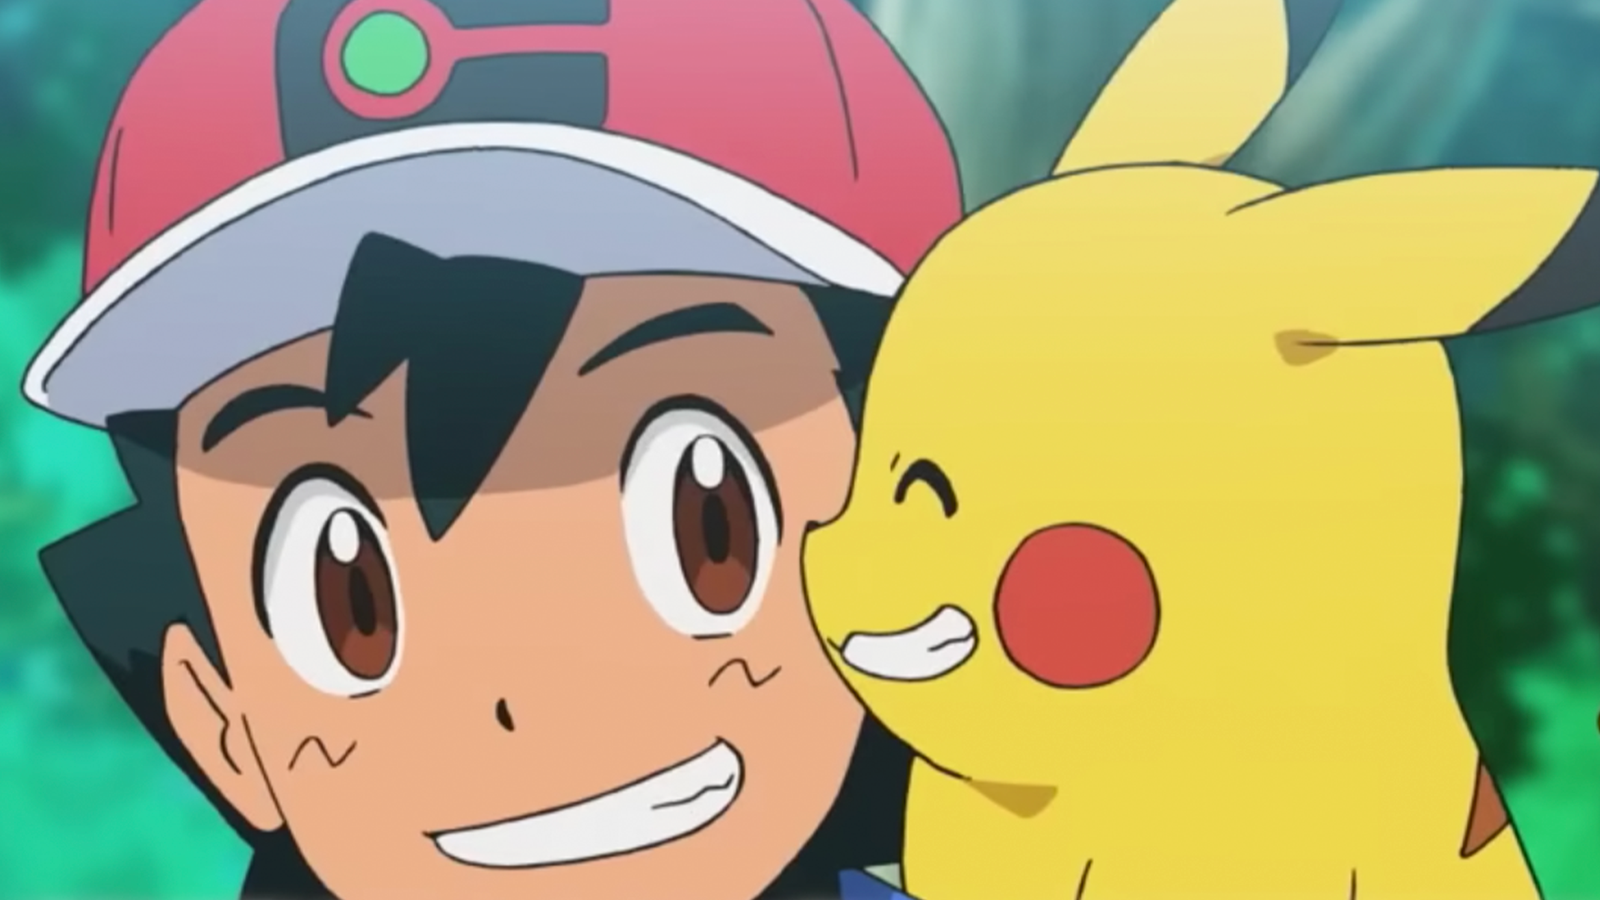 First 'Pokémon Horizons' Episode Synopsis Seemingly Appears Online